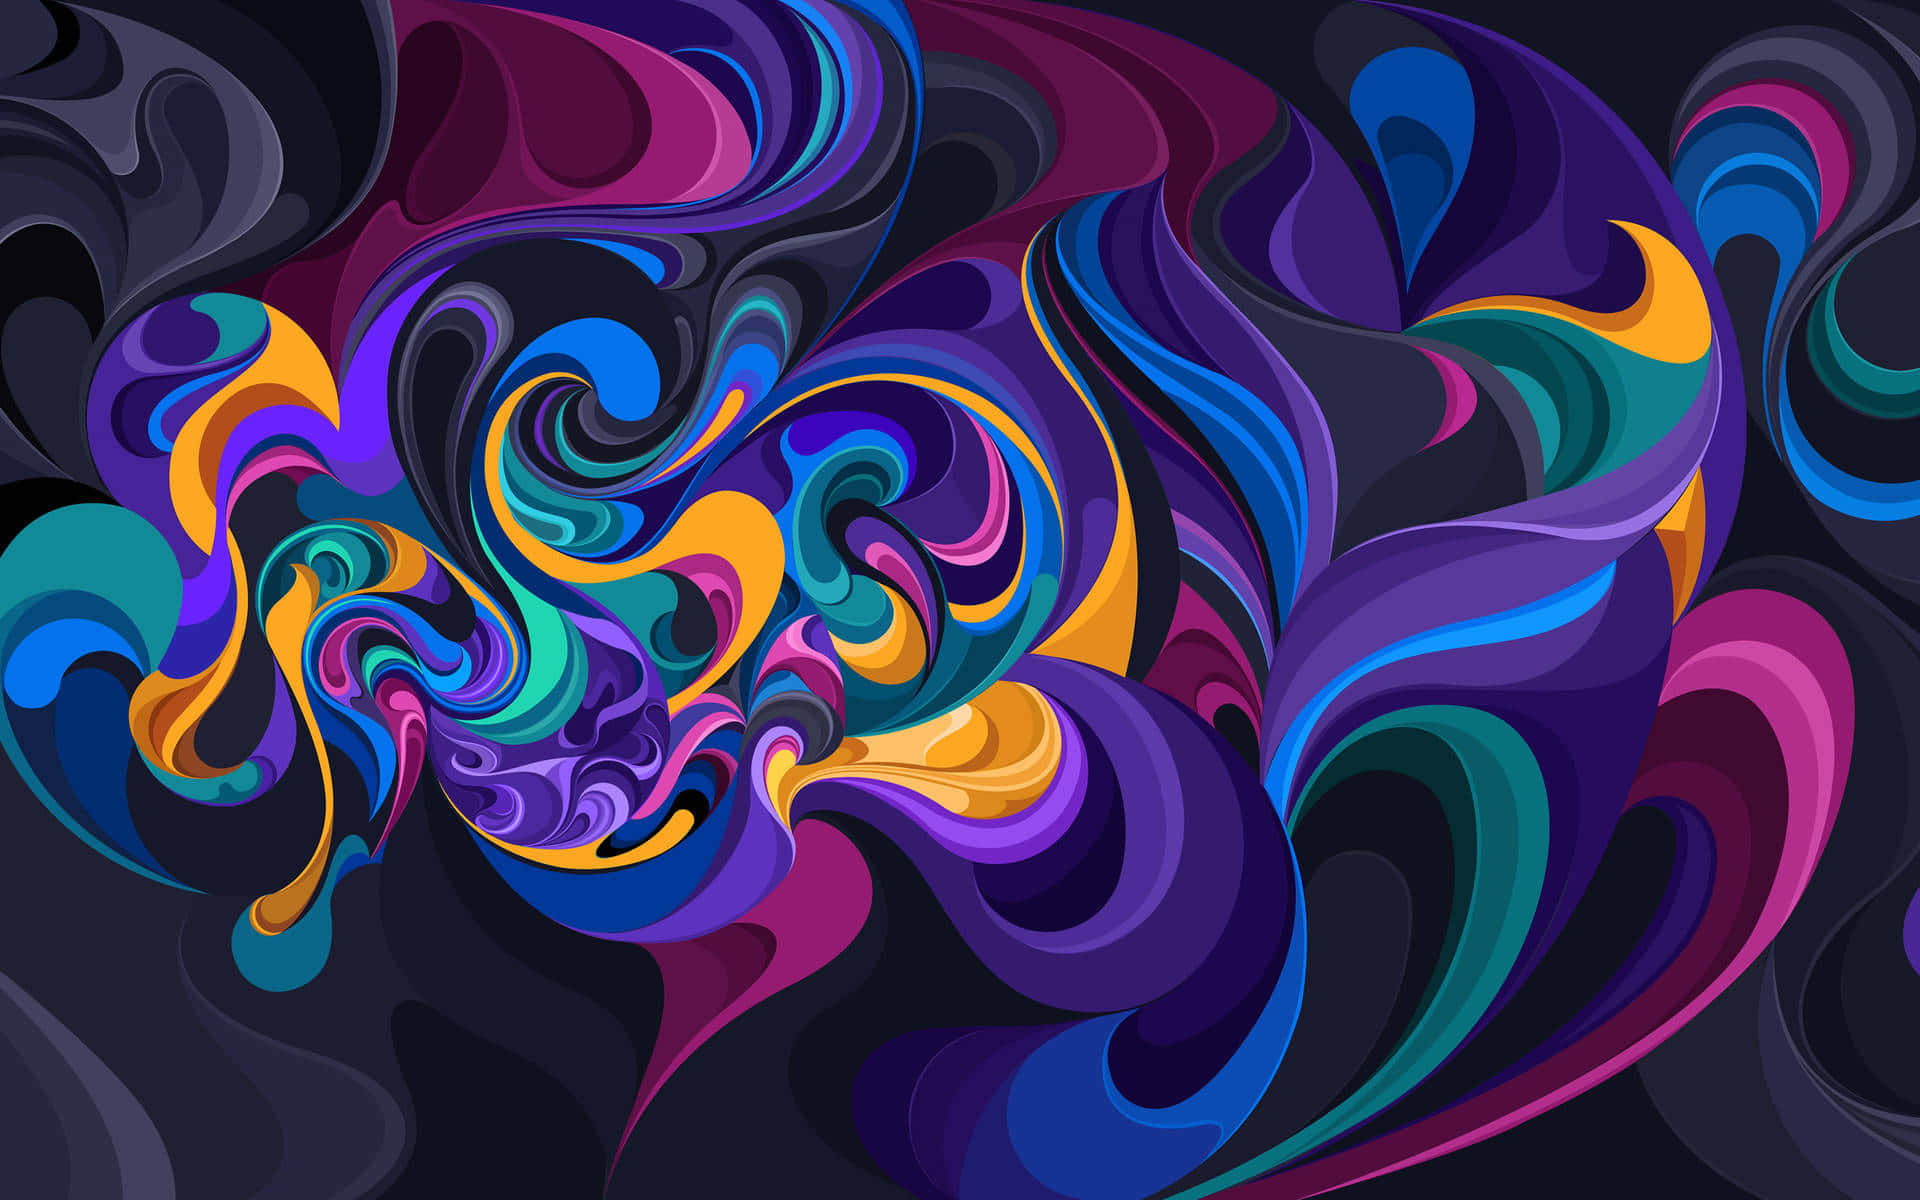 A Colorful Abstract Background With Swirls